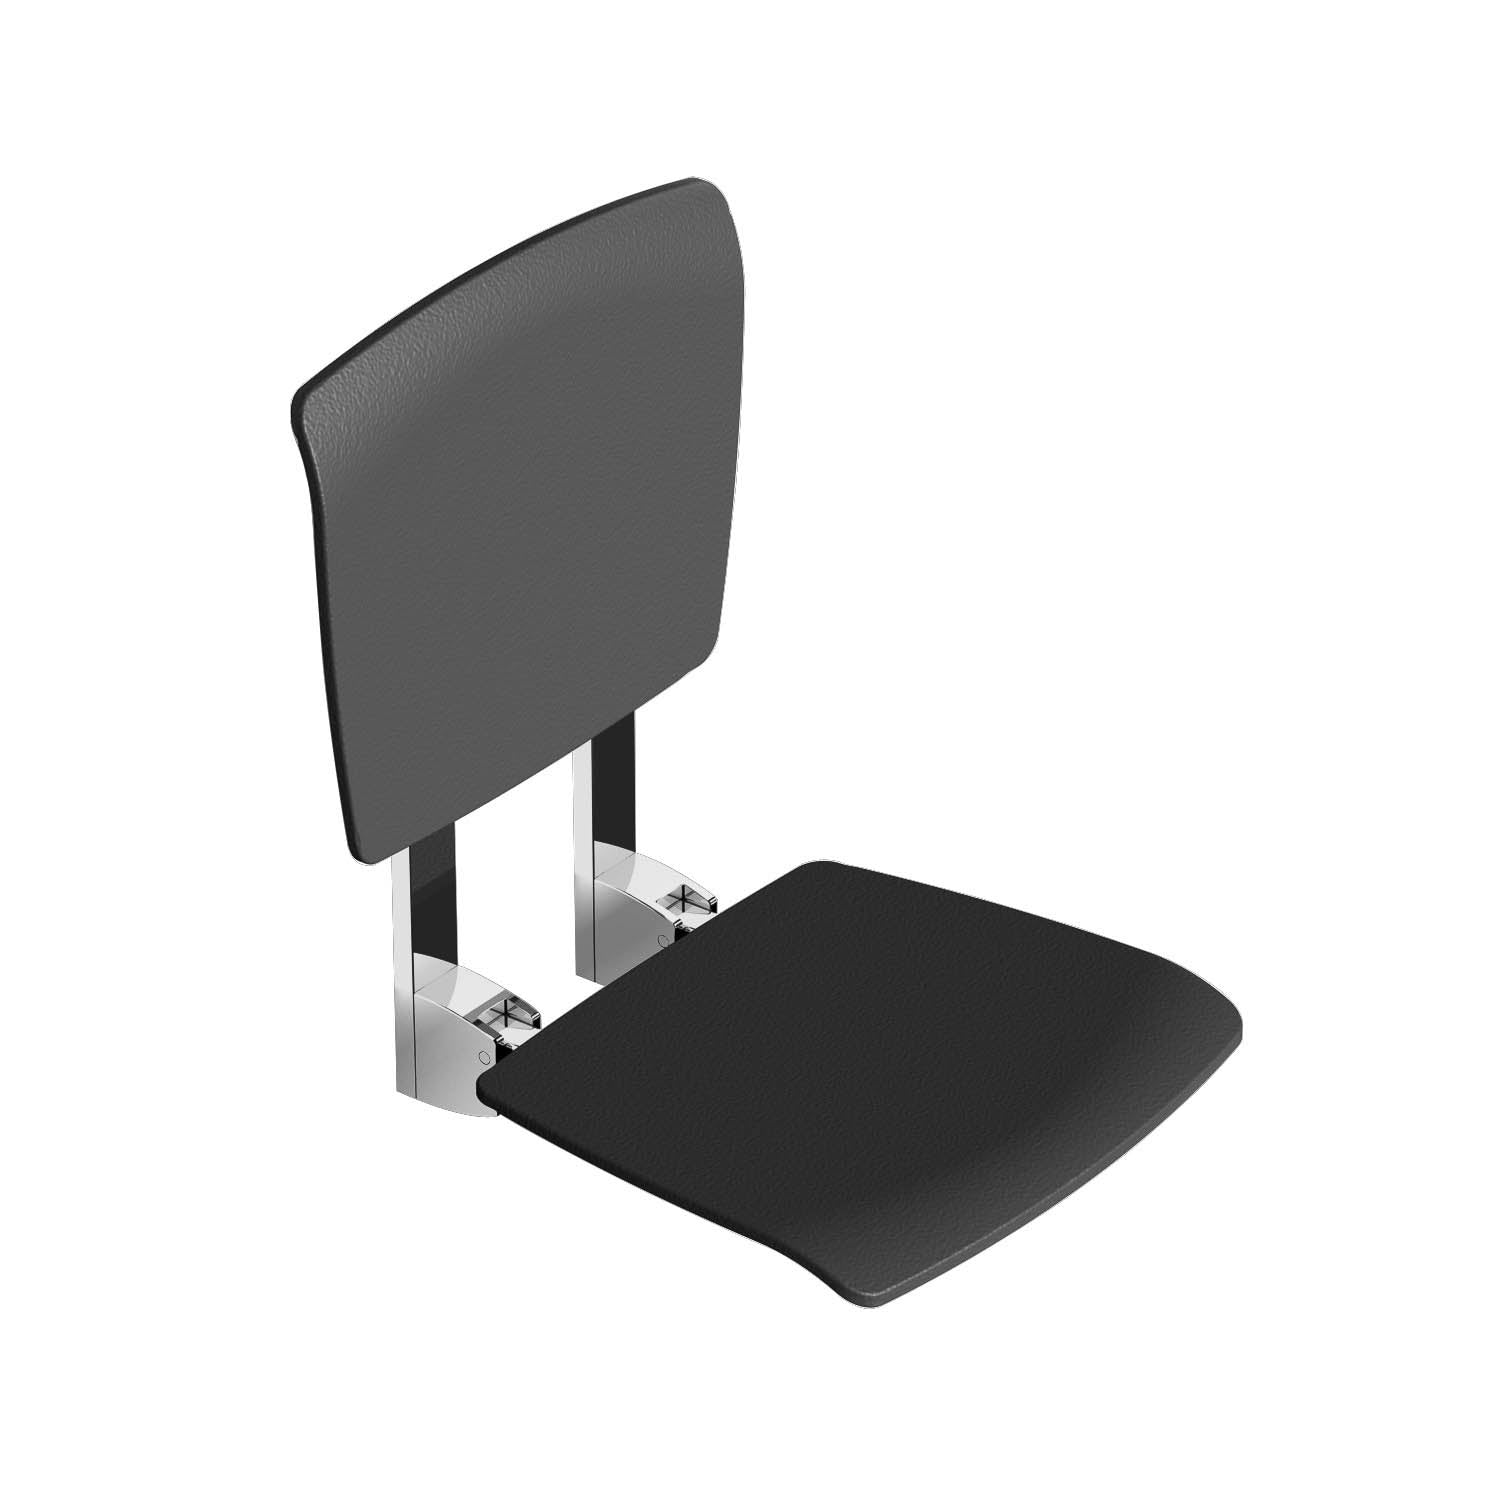 Esense Fixed Shower Seat and backrest with a black finish on a white background